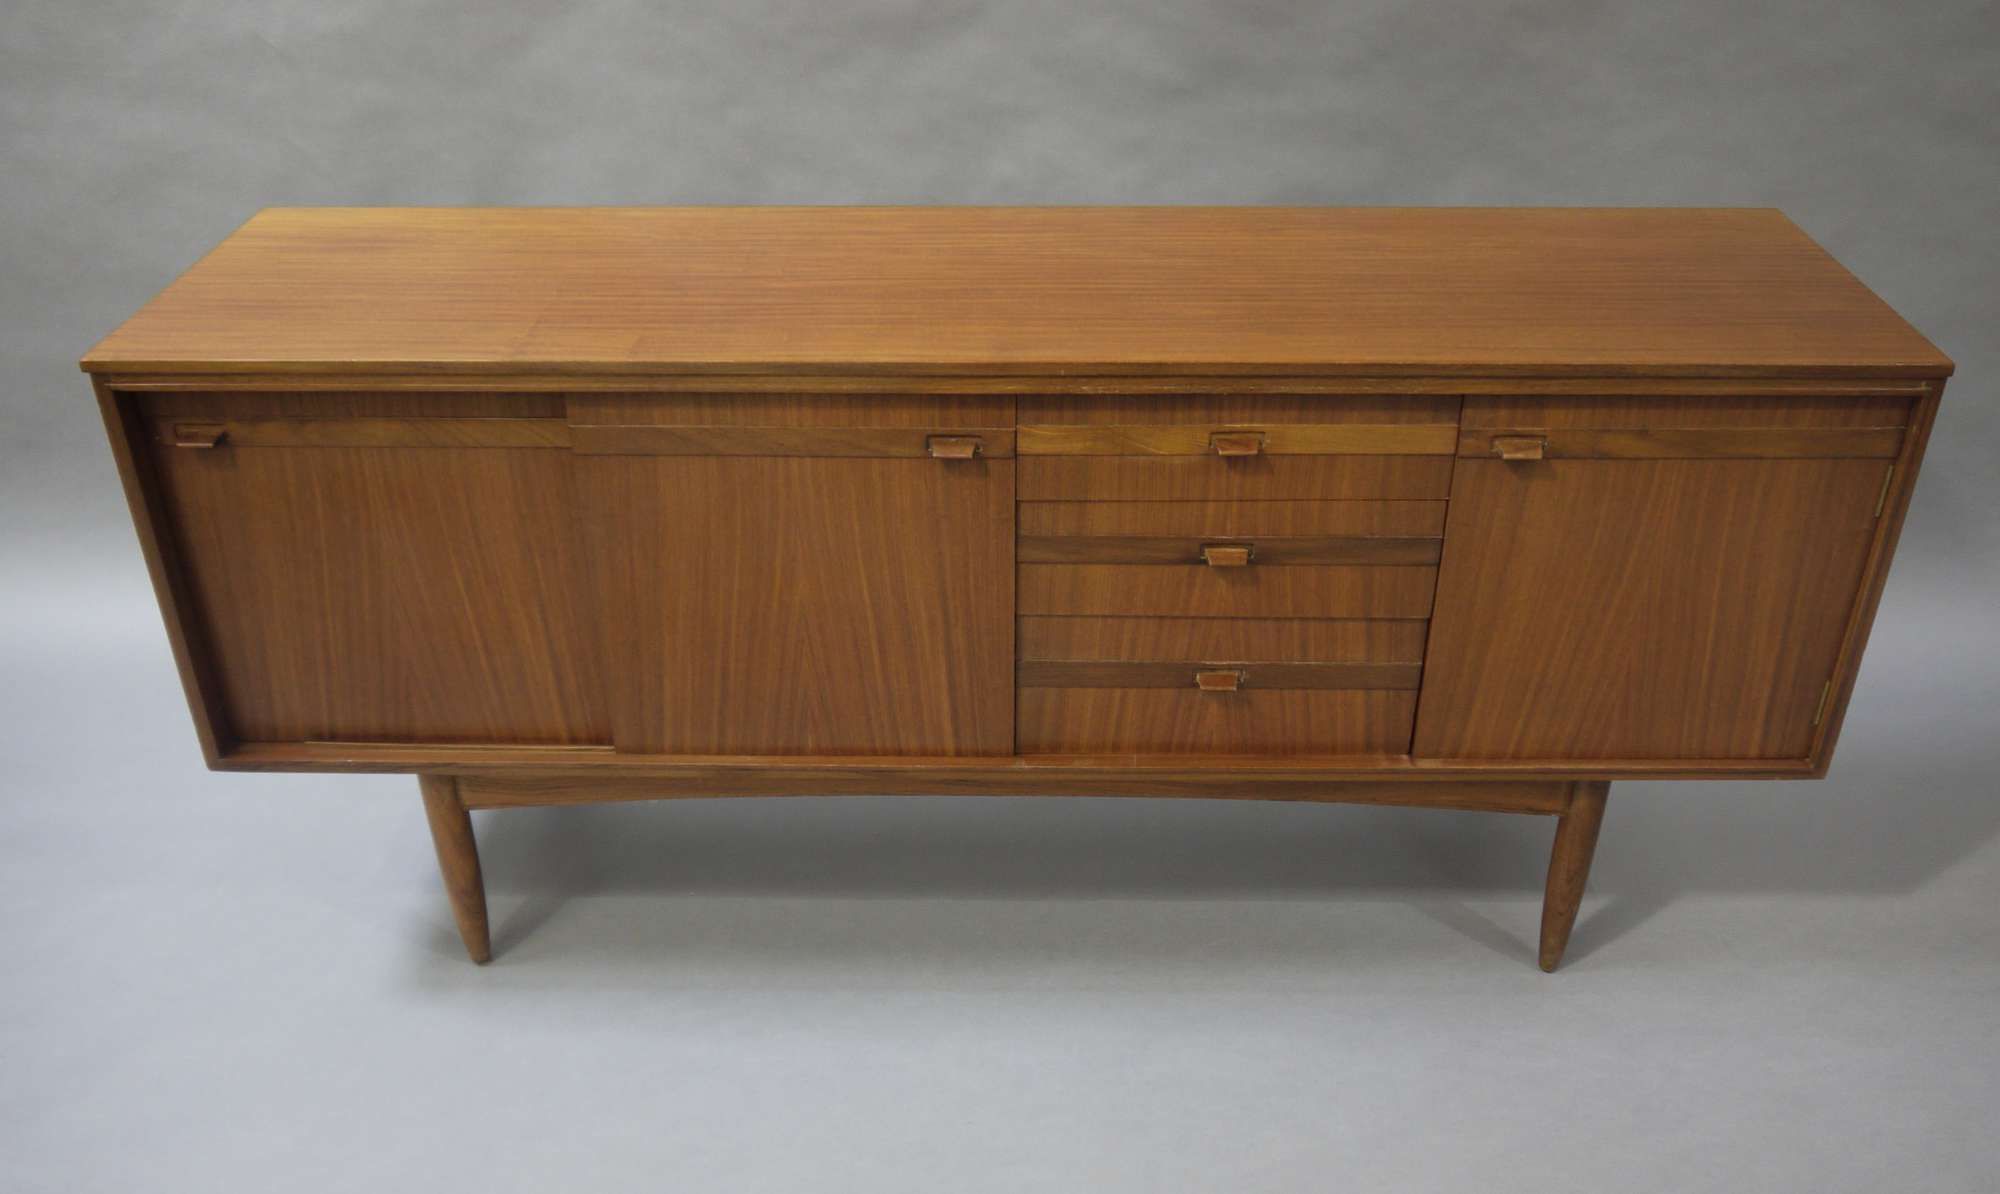 Lot:4 | White And Newton Ltd., Portsmouth, 'drummond' Model Intended For Drummond 4 Drawer Sideboards (Gallery 19 of 20)